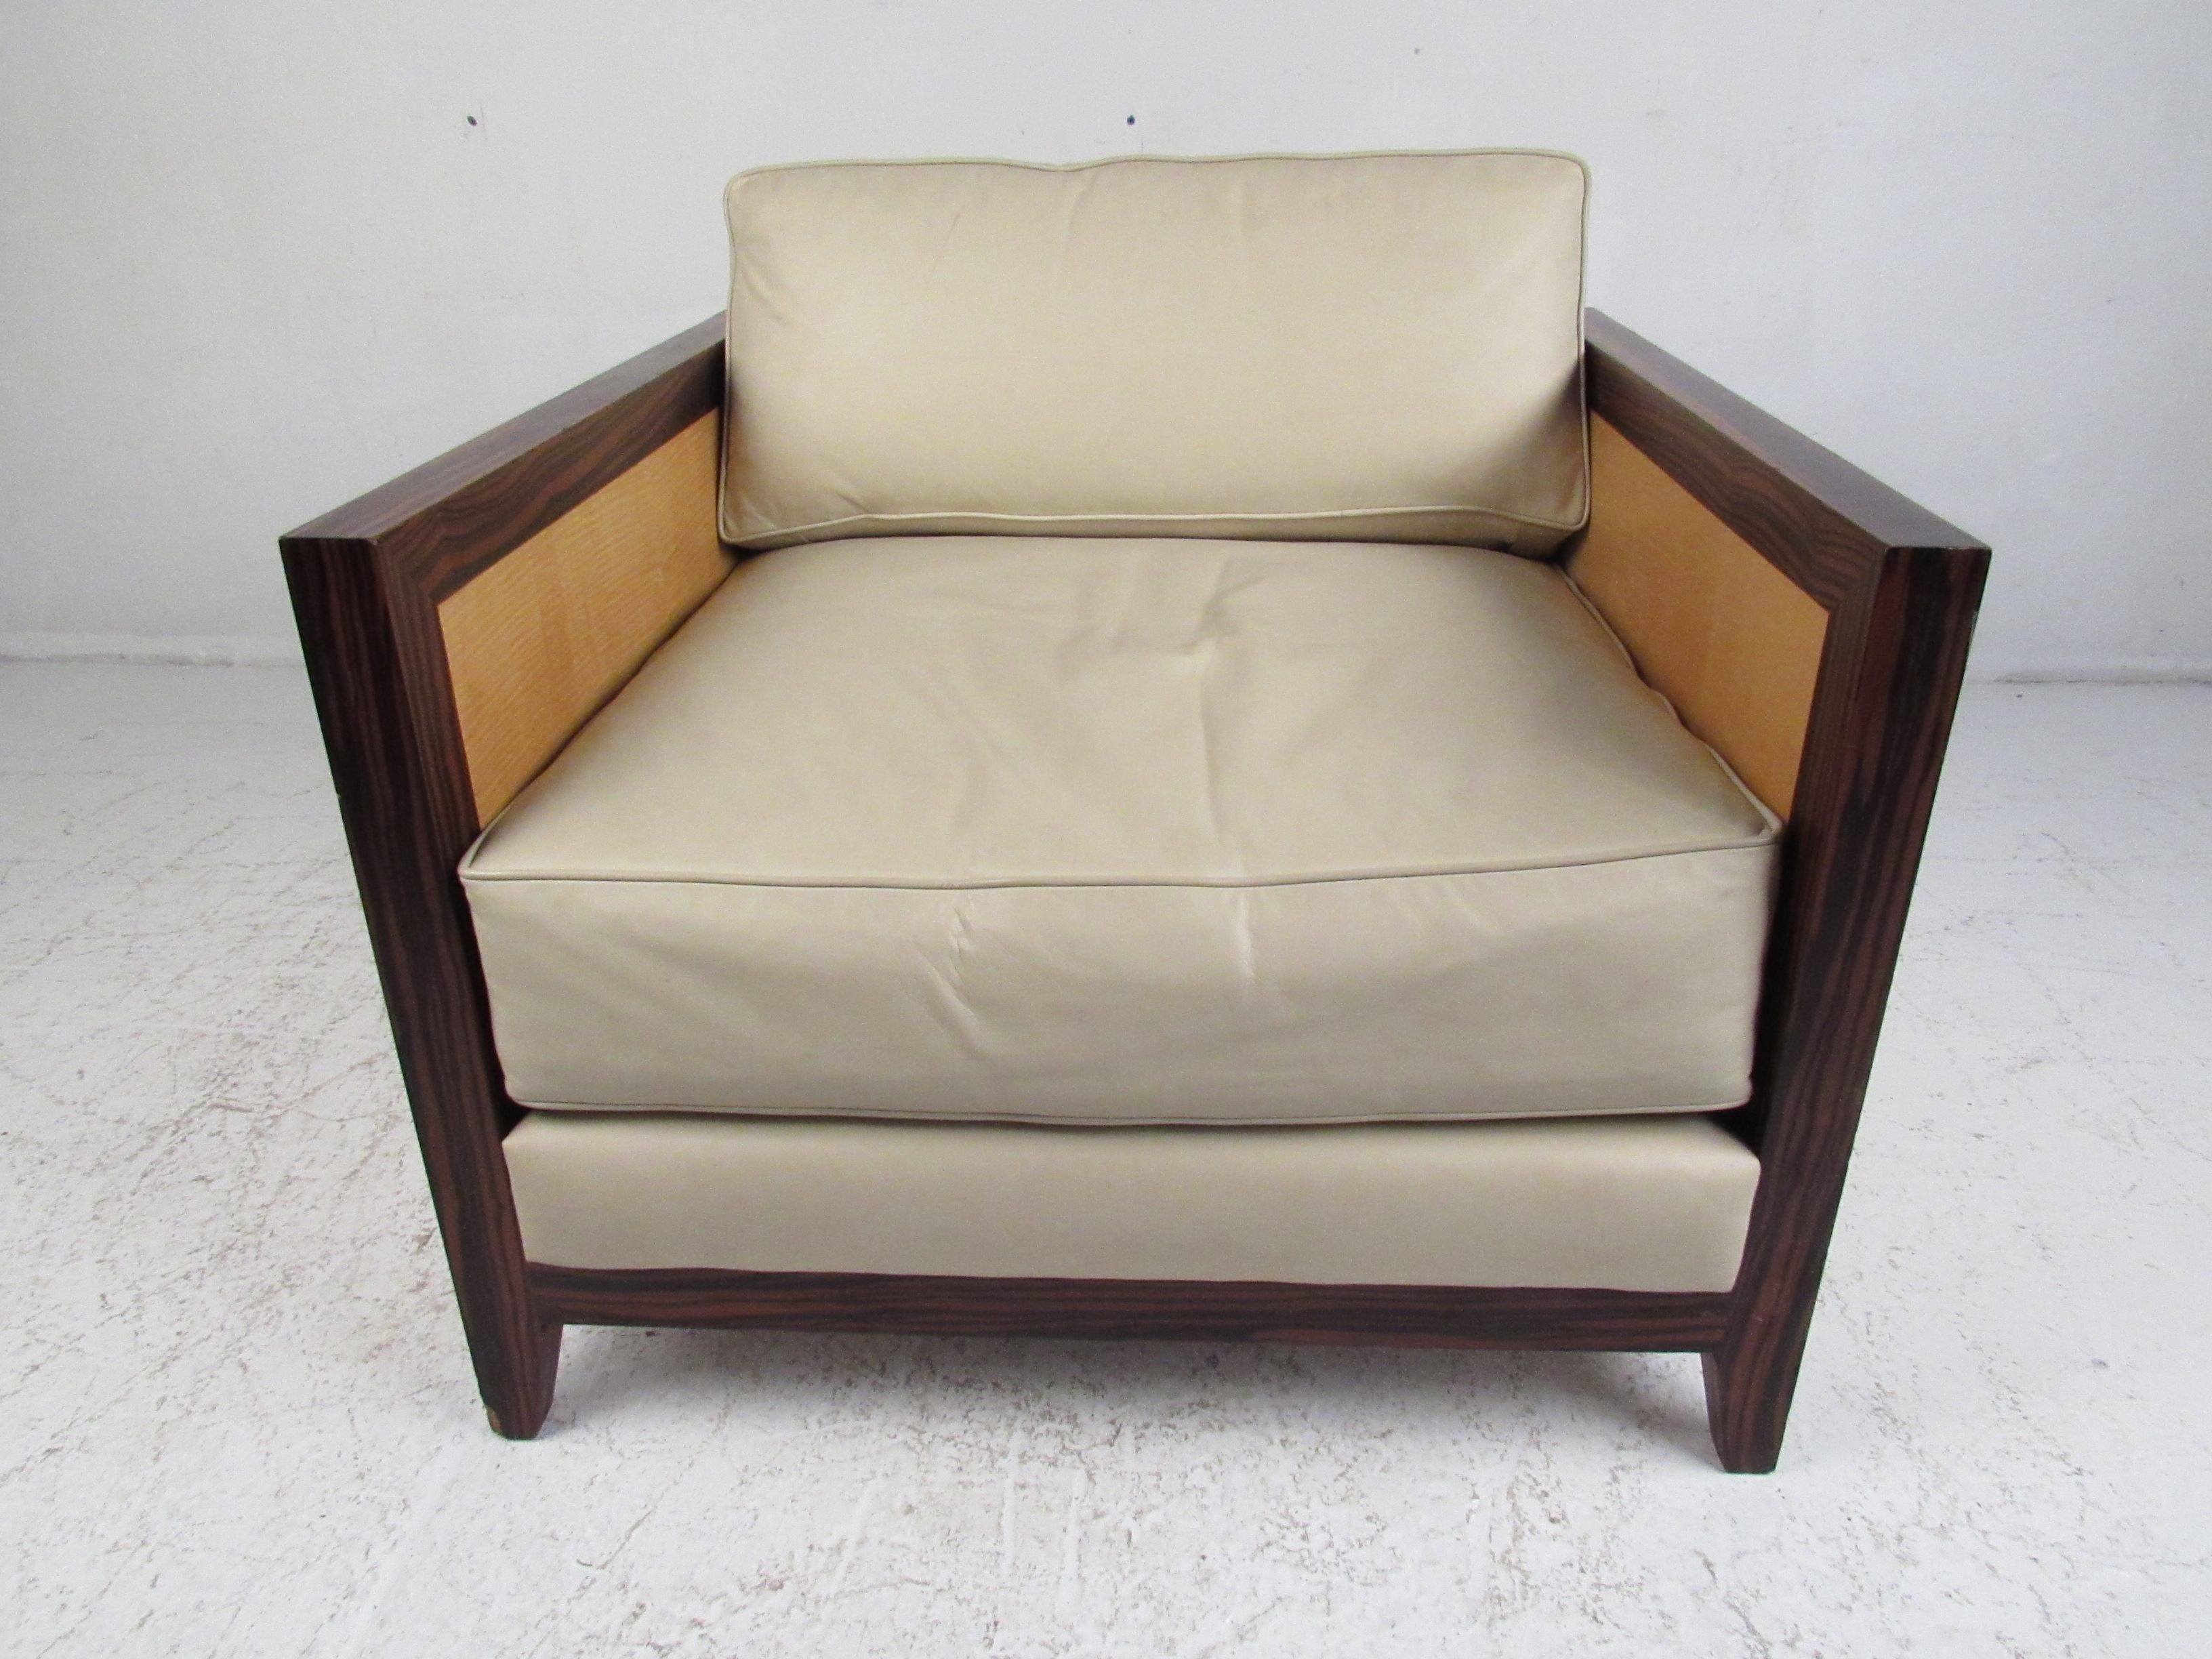 This beautiful vintage modern lounge chair features a cube shaped frame with two-tone wood, thick padded removable cushions and tapered legs. A well constructed chair by Interior Crafts; this Milo Baughman style armchair boasts an elegant rosewood